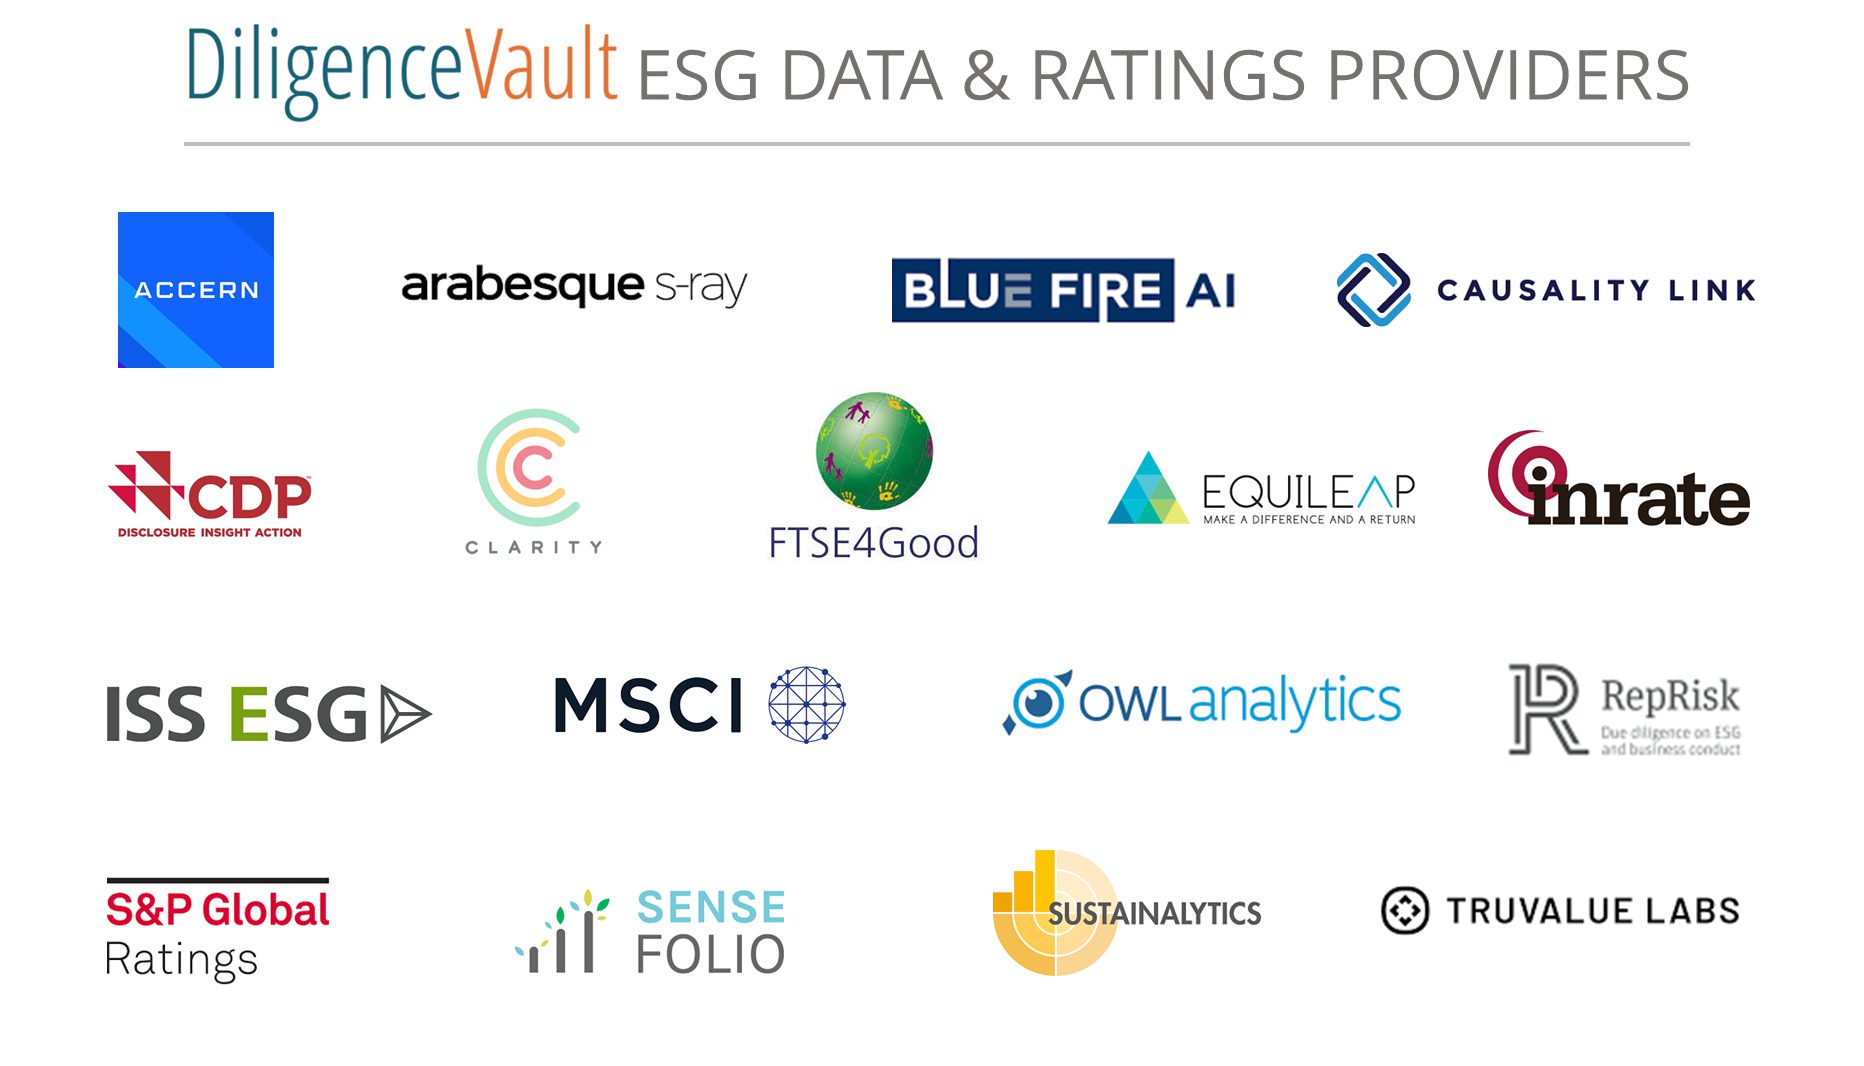 ESG Data Technology and Ratings